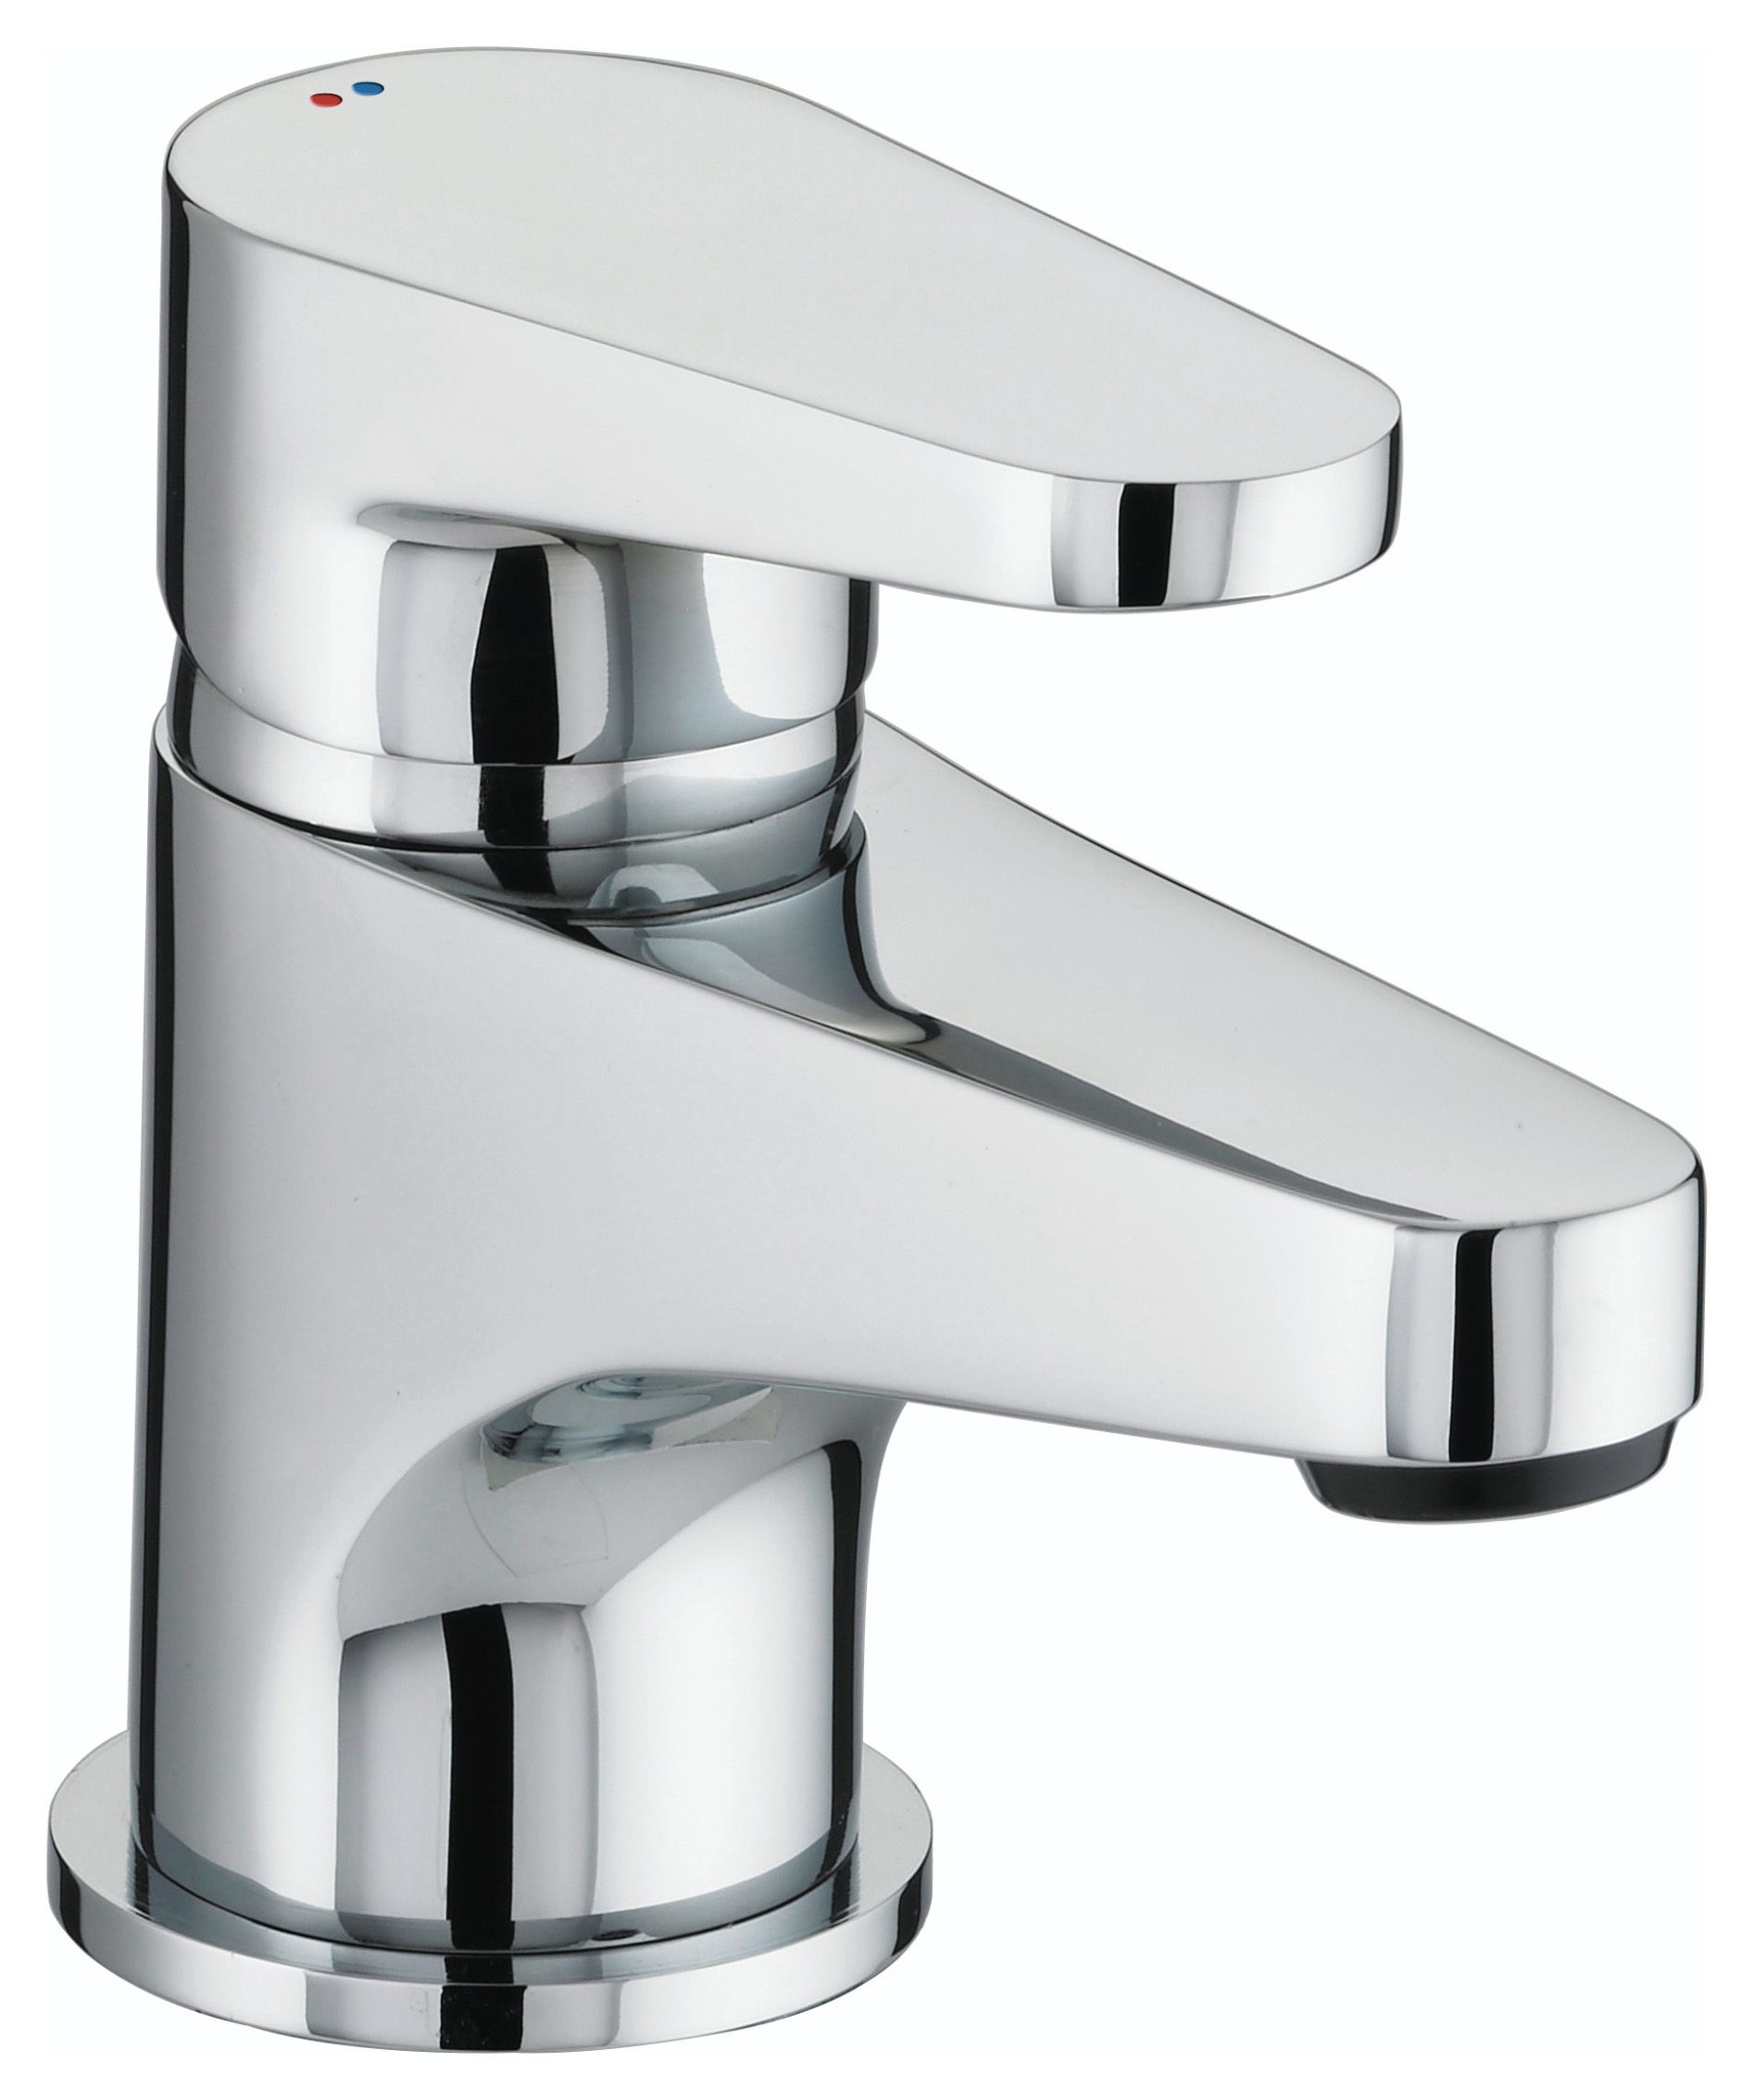 Image of Bristan Quest Chrome Basin Mixer Tap with Clicker Waste